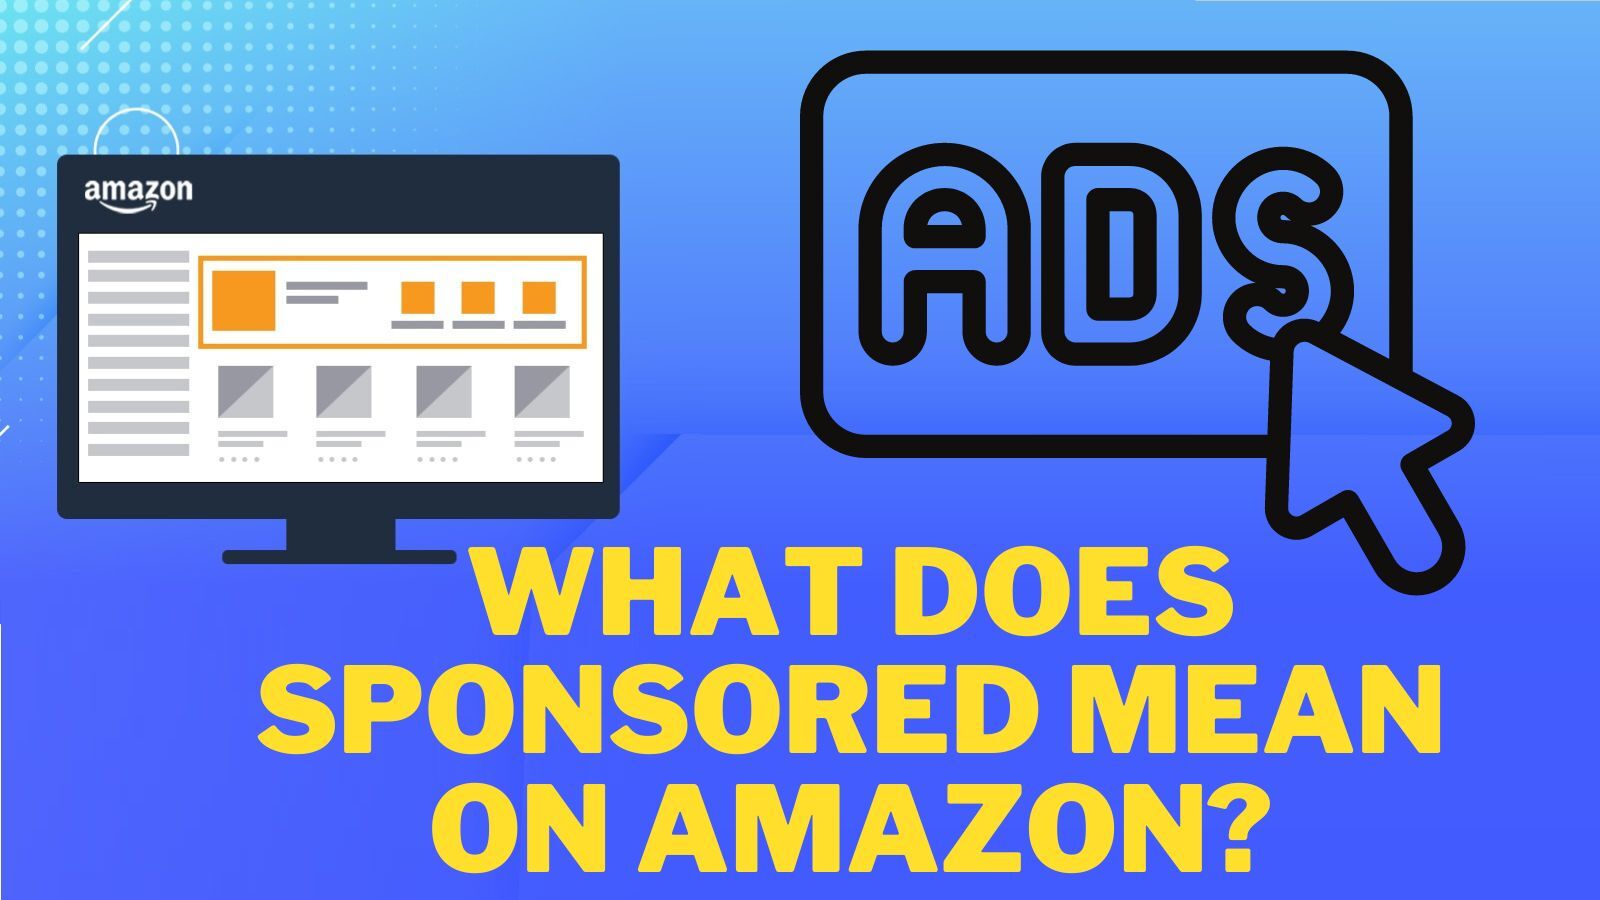 What Does "Sponsored" Mean On Amazon? (The Answer Is Unexpected!)